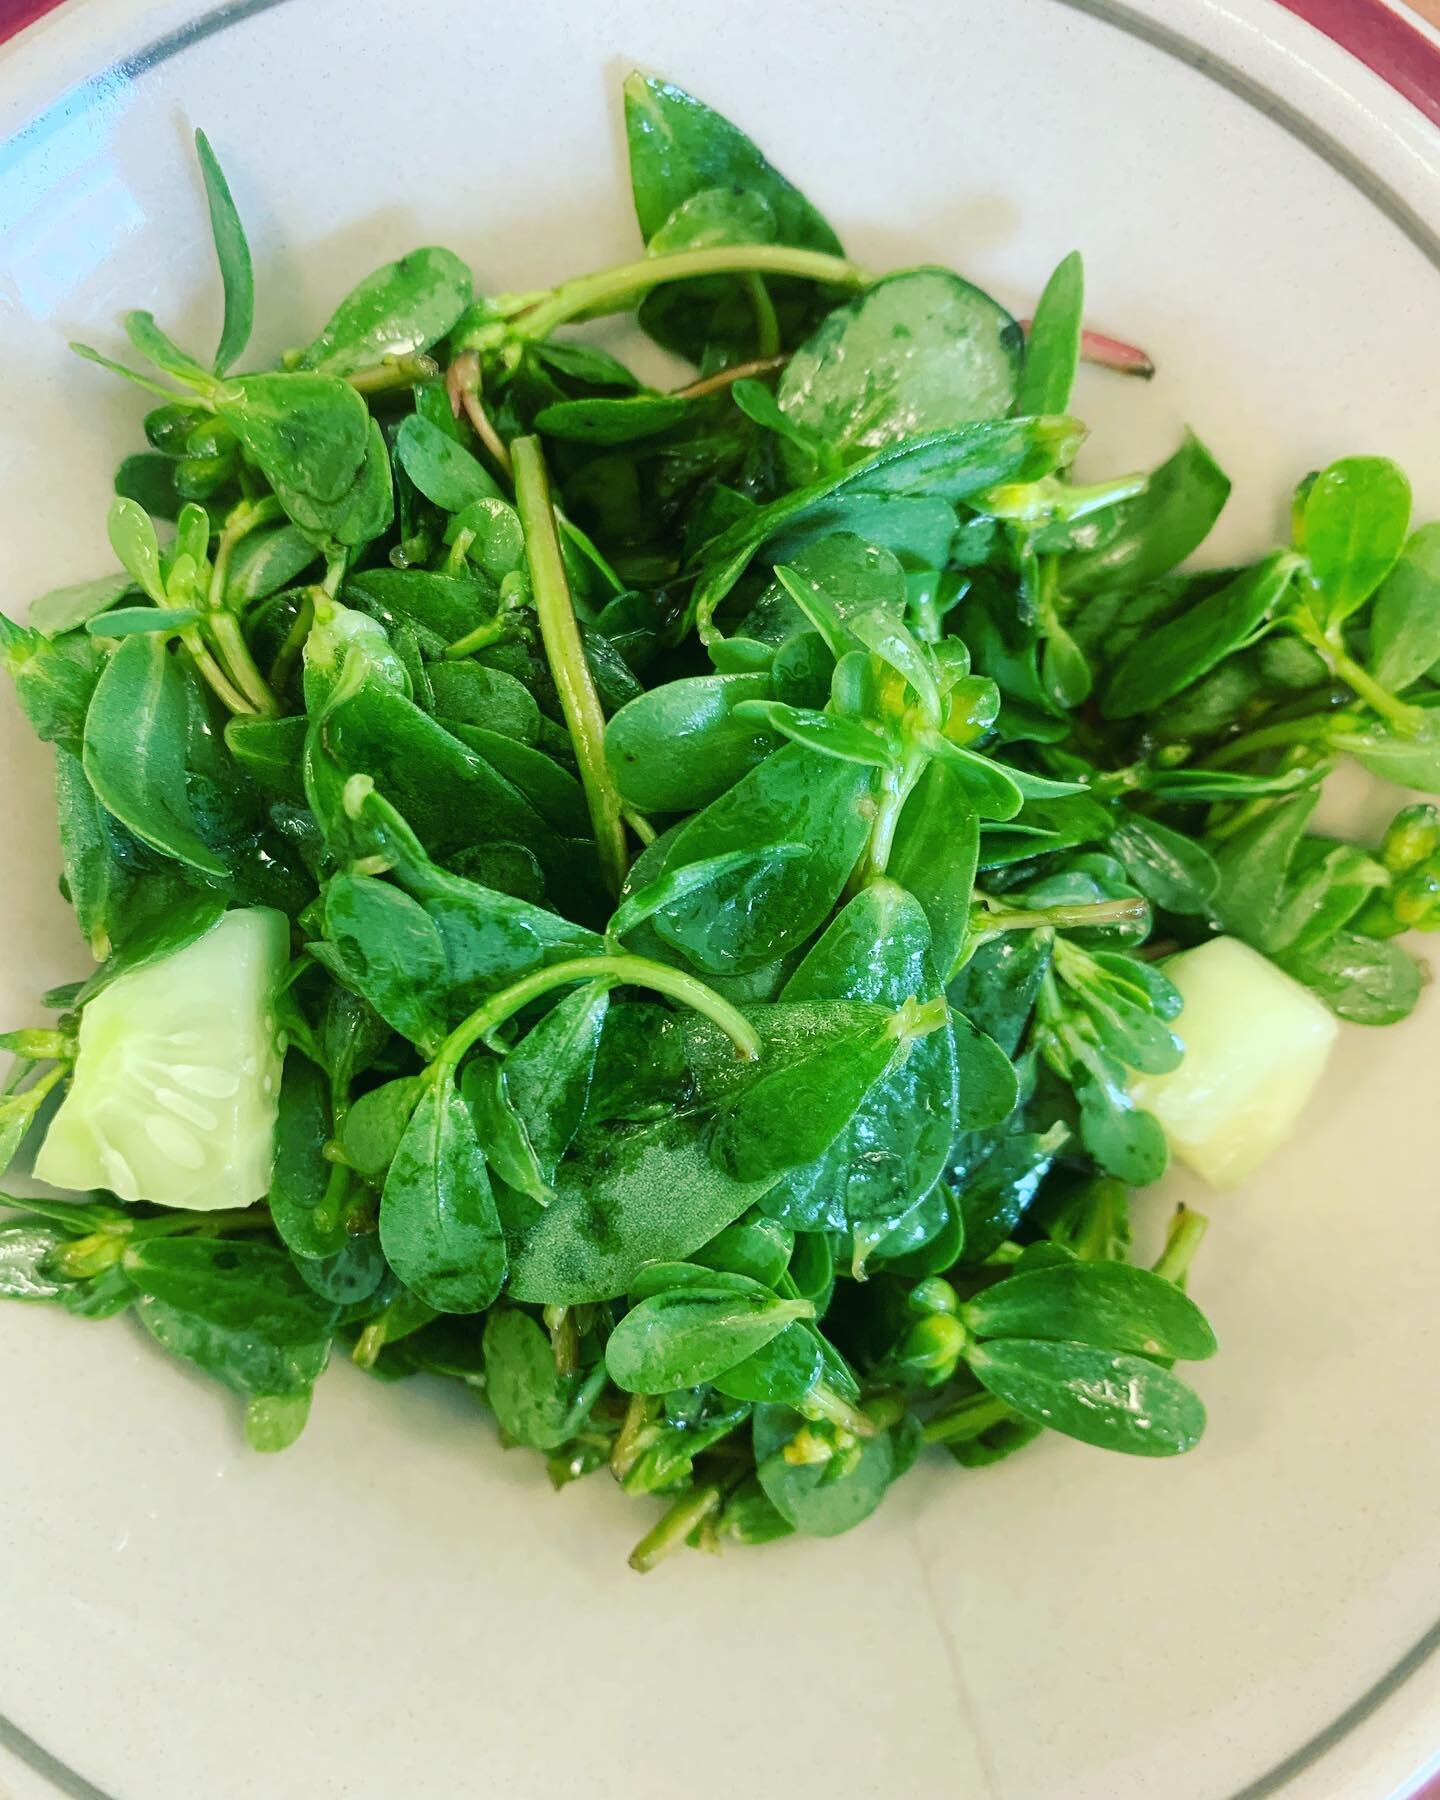 Purslane is full of beta-carotene, the pigment responsible for the reddish color of its stems and leaves. Beta-carotene is one of many antioxidant s found in purslane.

These antioxidants have been found to reduce the number of free radicals in your 